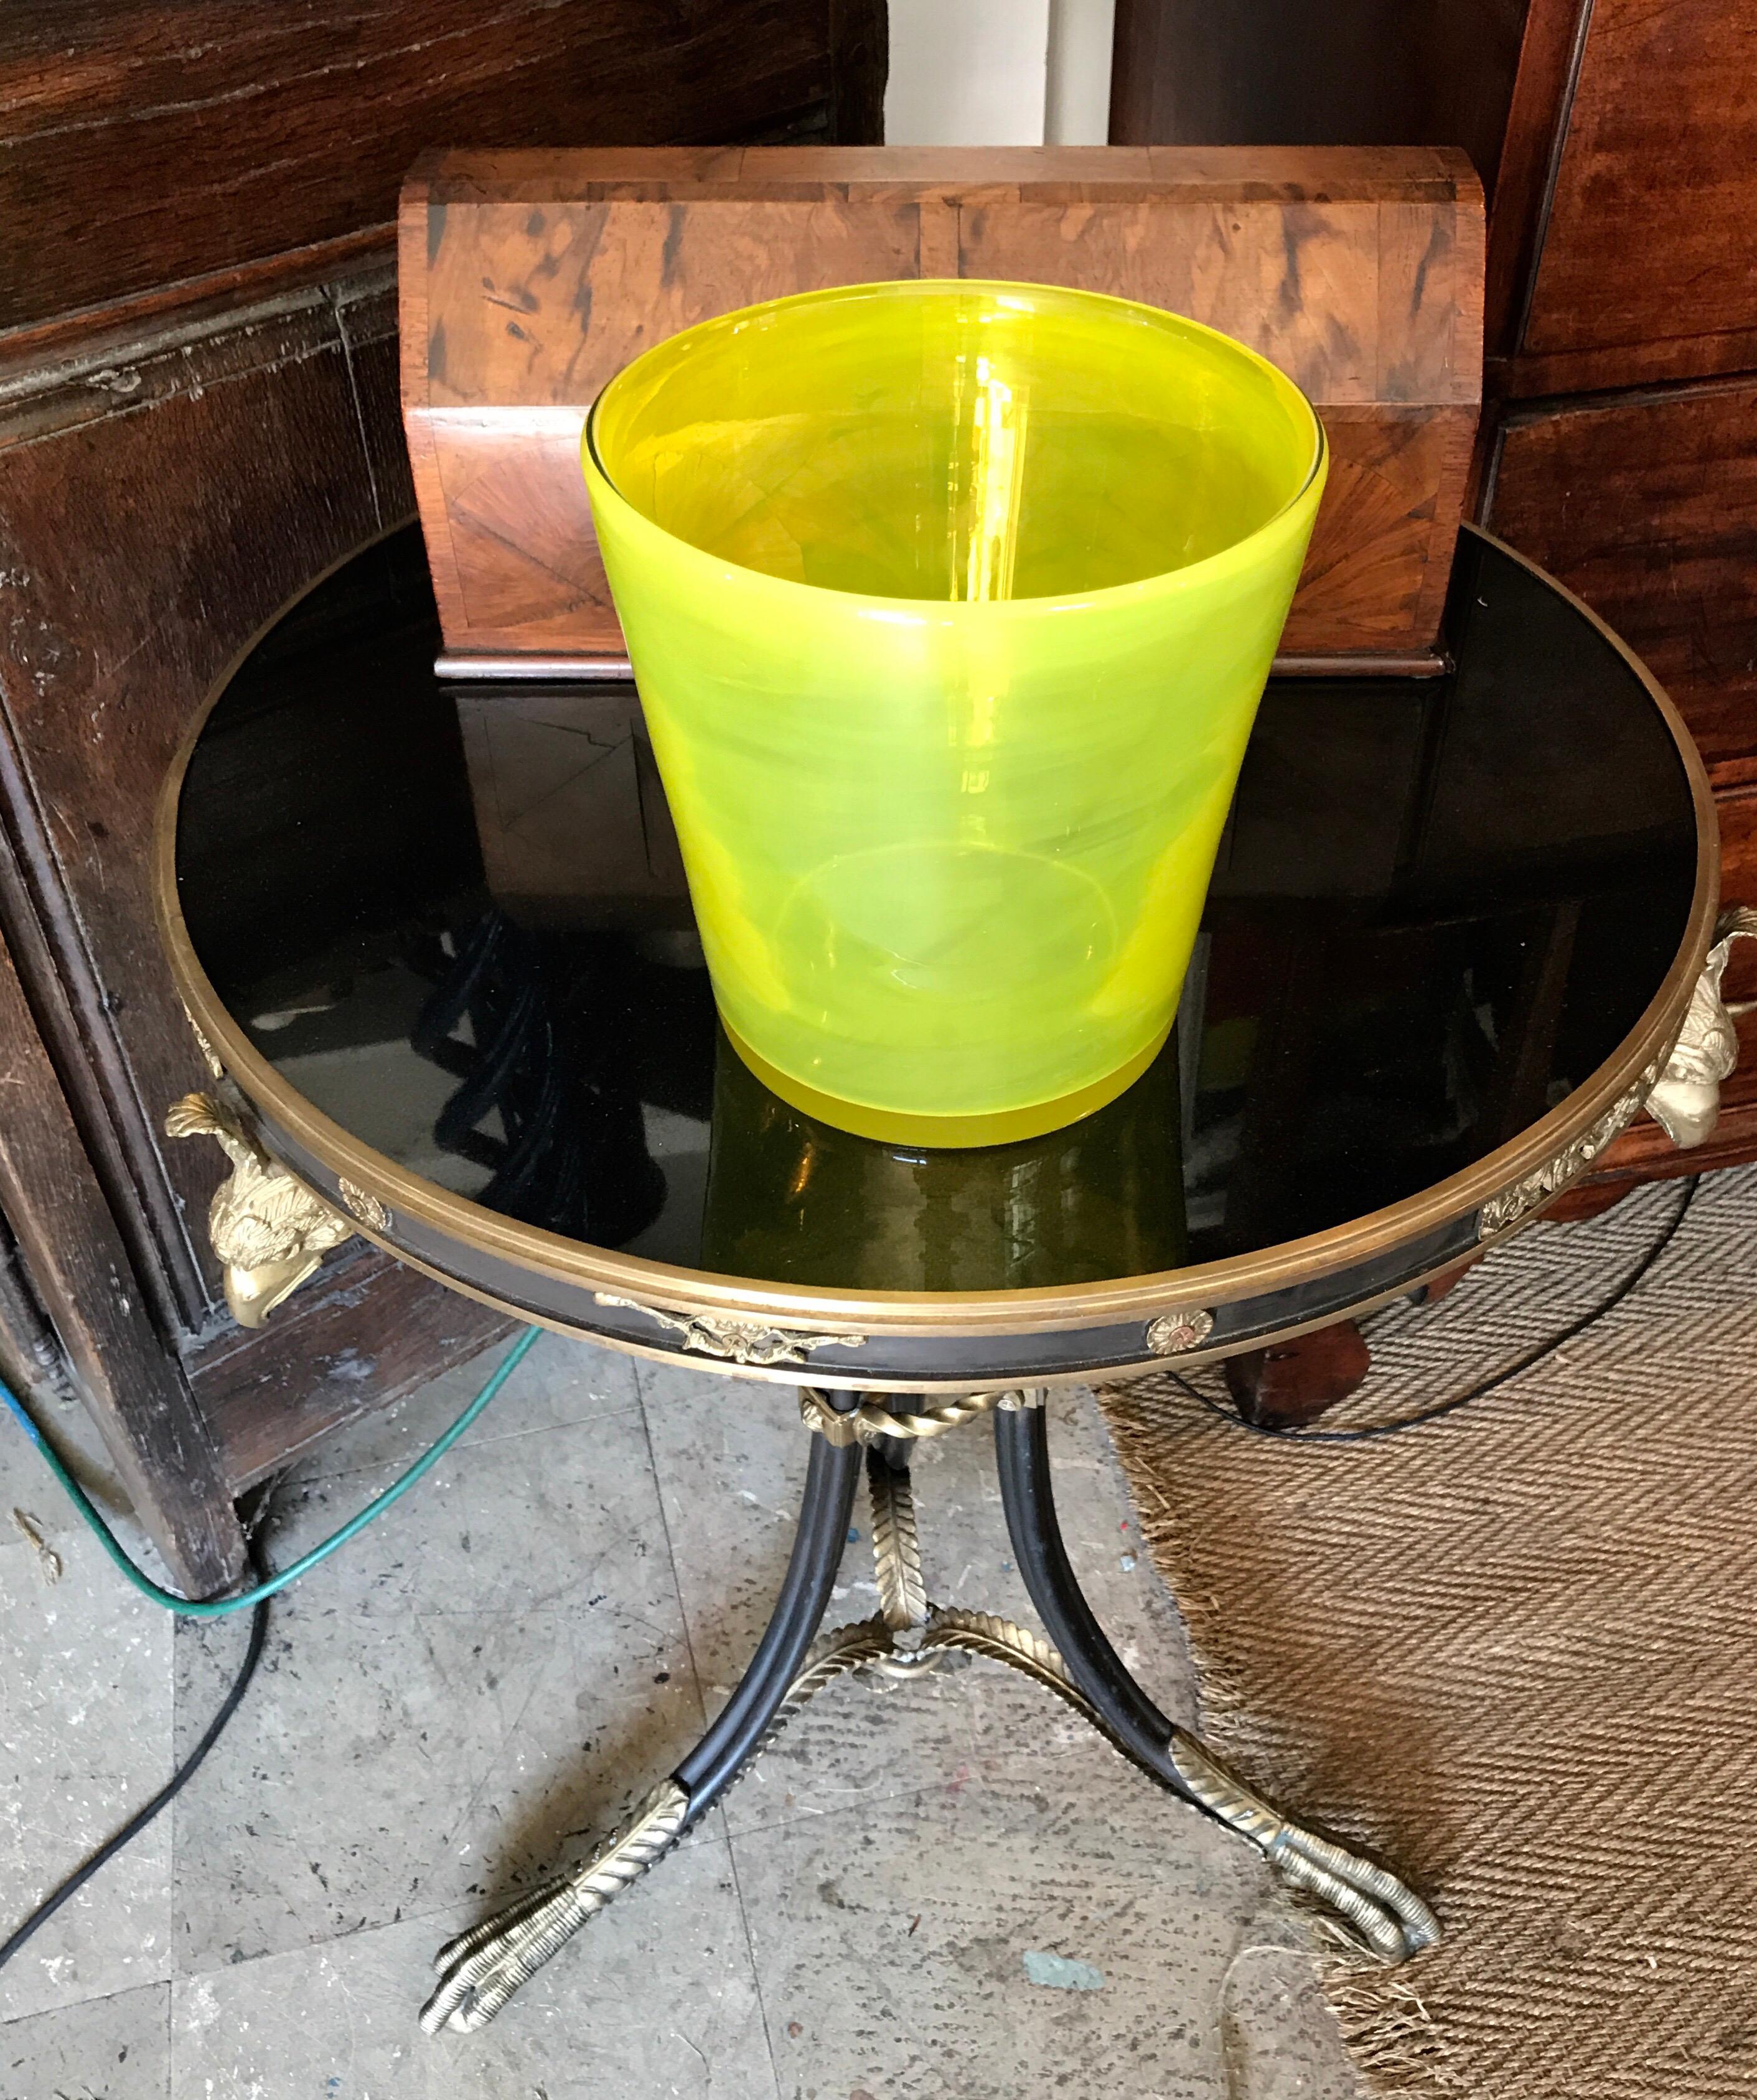 A stunning and eye-catching art glass ice bucket in a vibrant citron yellow or green. The vessel has a soft rounded top edge and slight turning ripples down the face of the wine bottle cooler form. The bottom is smooth, flat and polished, 1980s